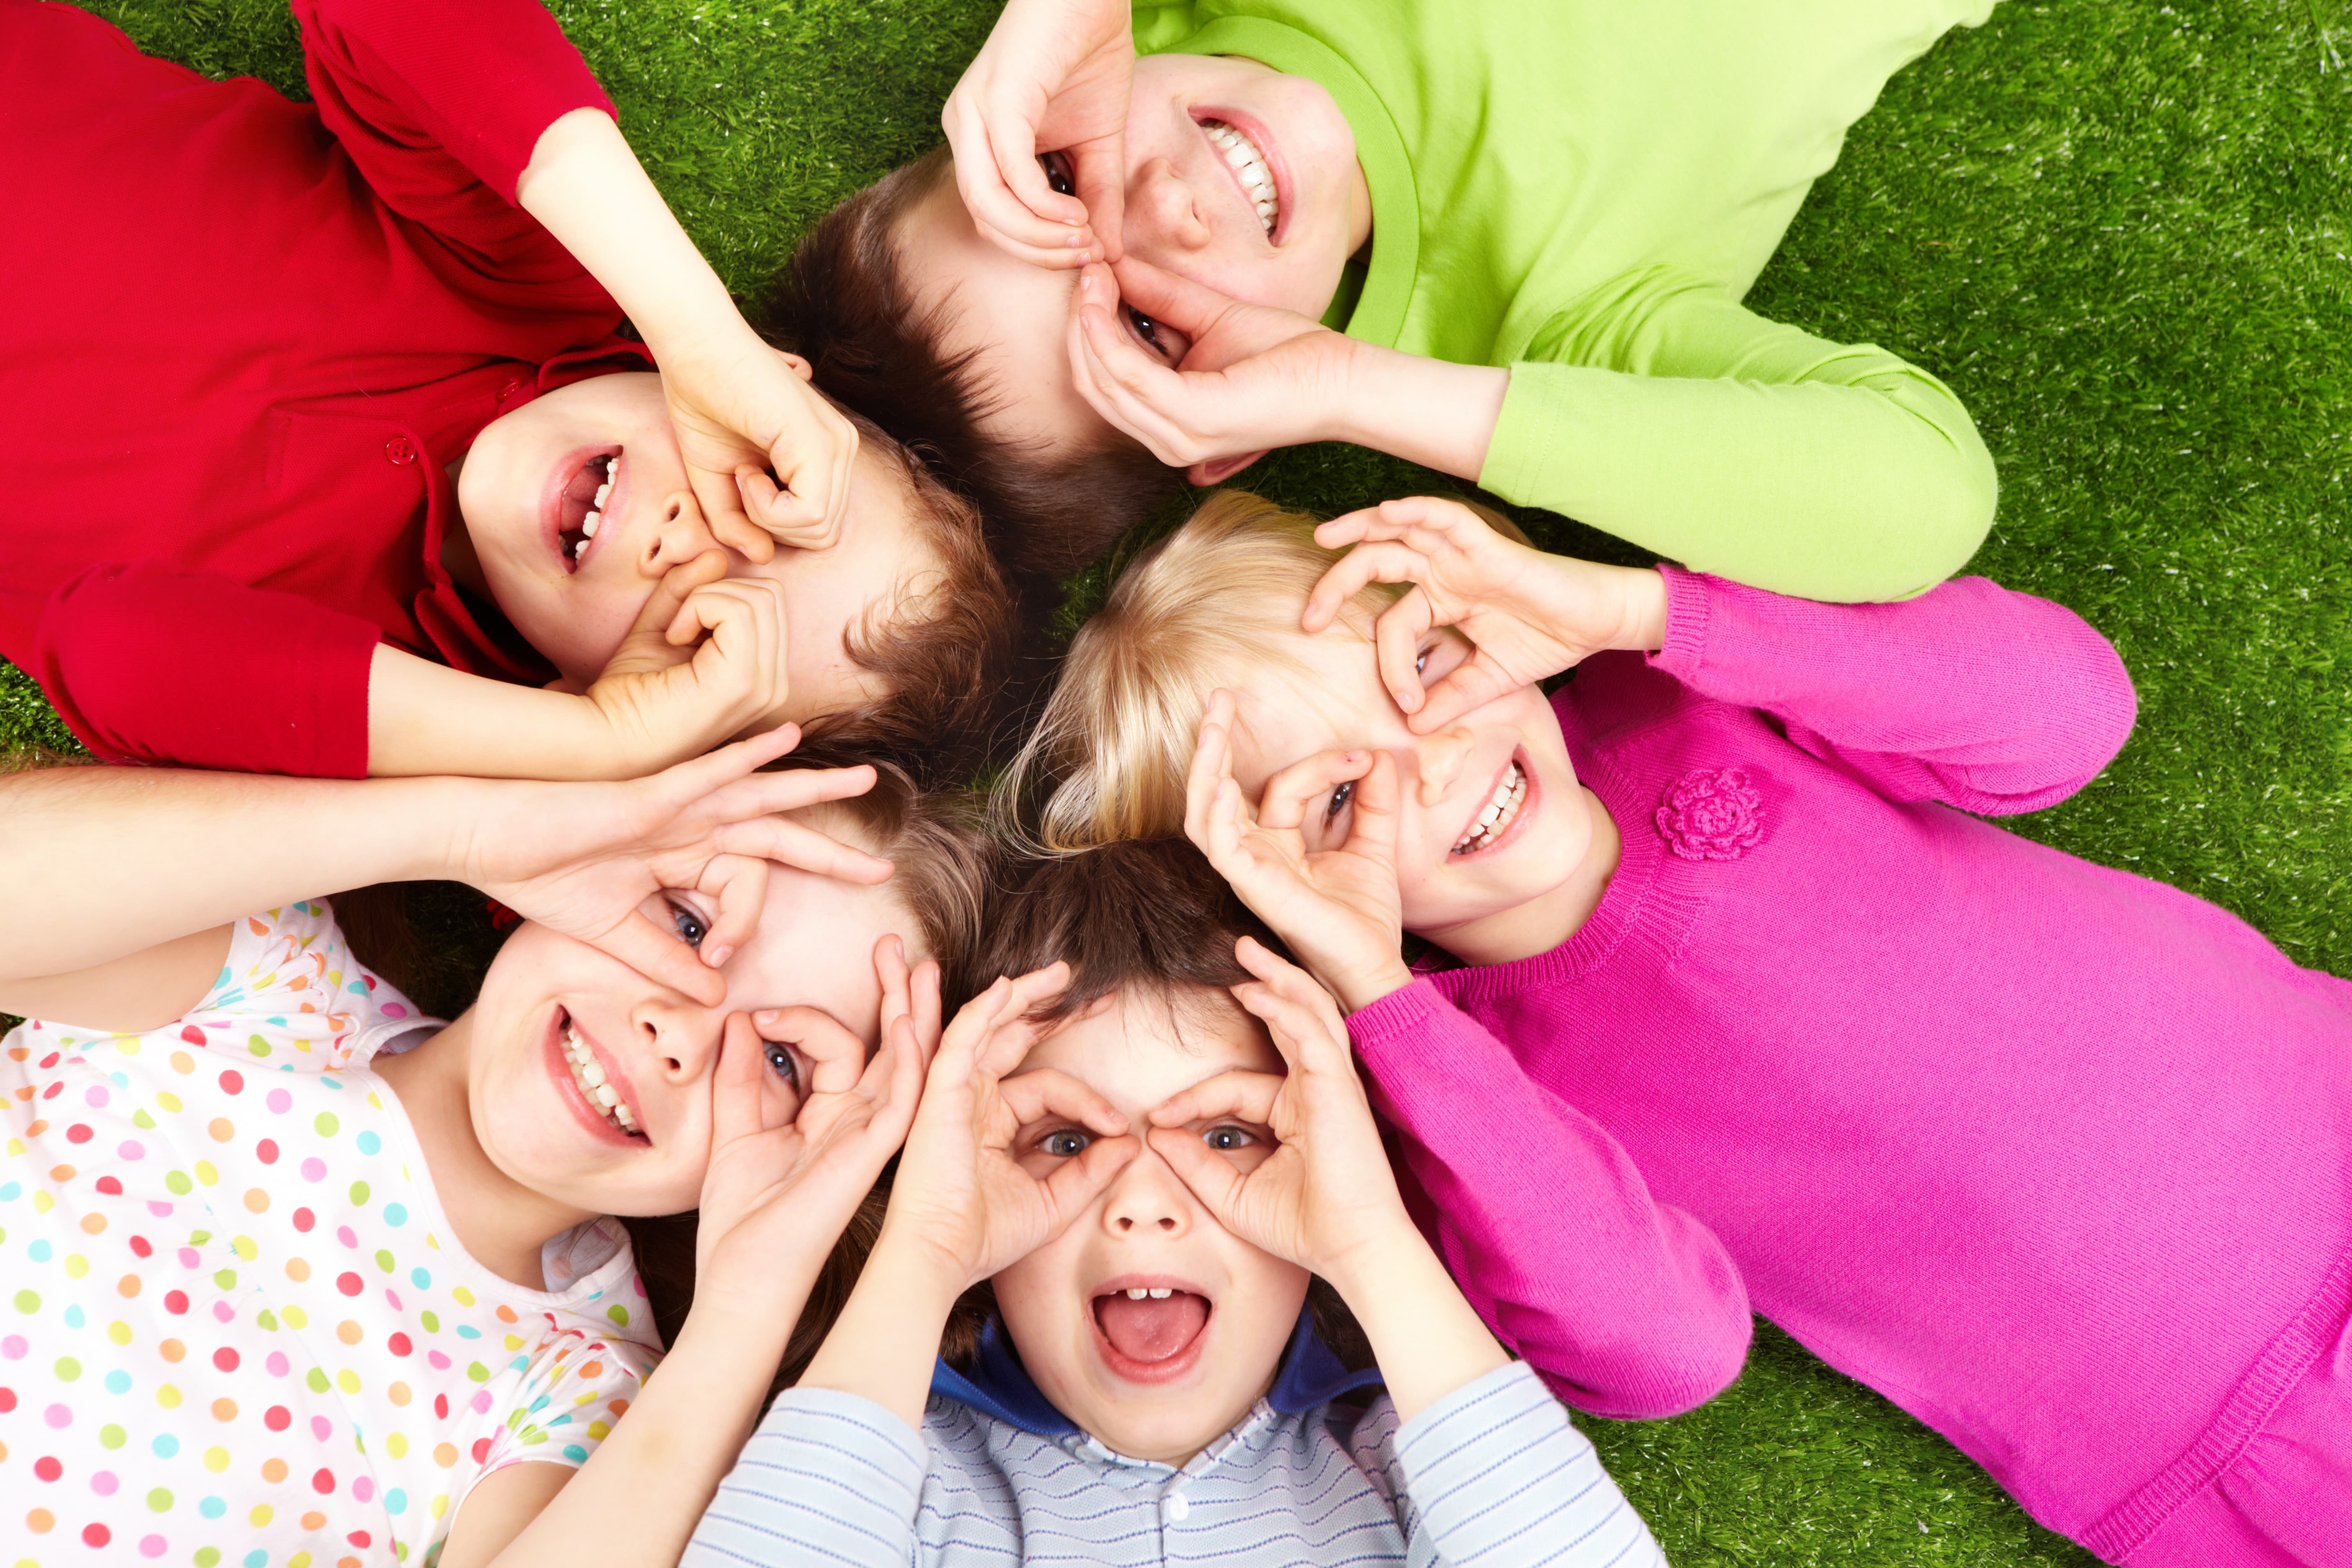 A group of children laying in the grass while making fake glasses on their eyes with their hands.